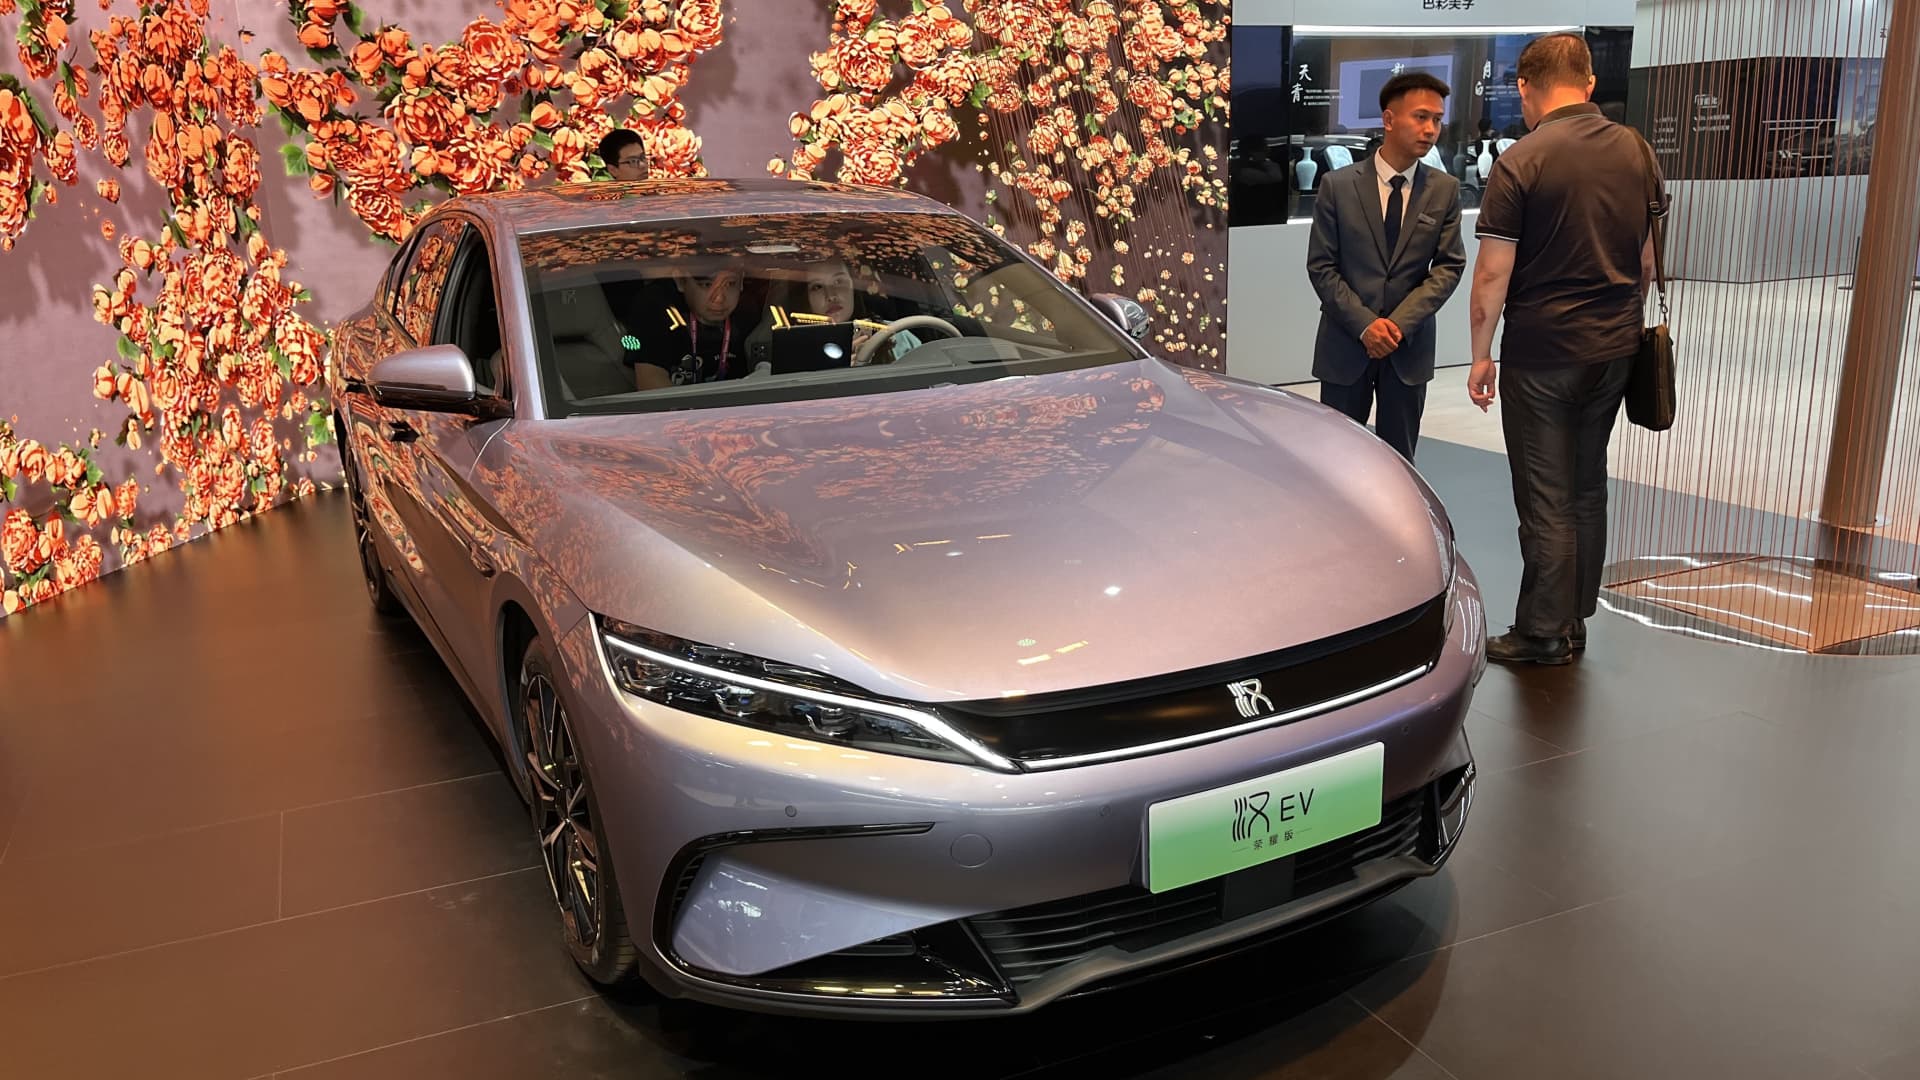 China’s hot EV market is no longer focused solely on lower sticker prices. Which stocks to watch